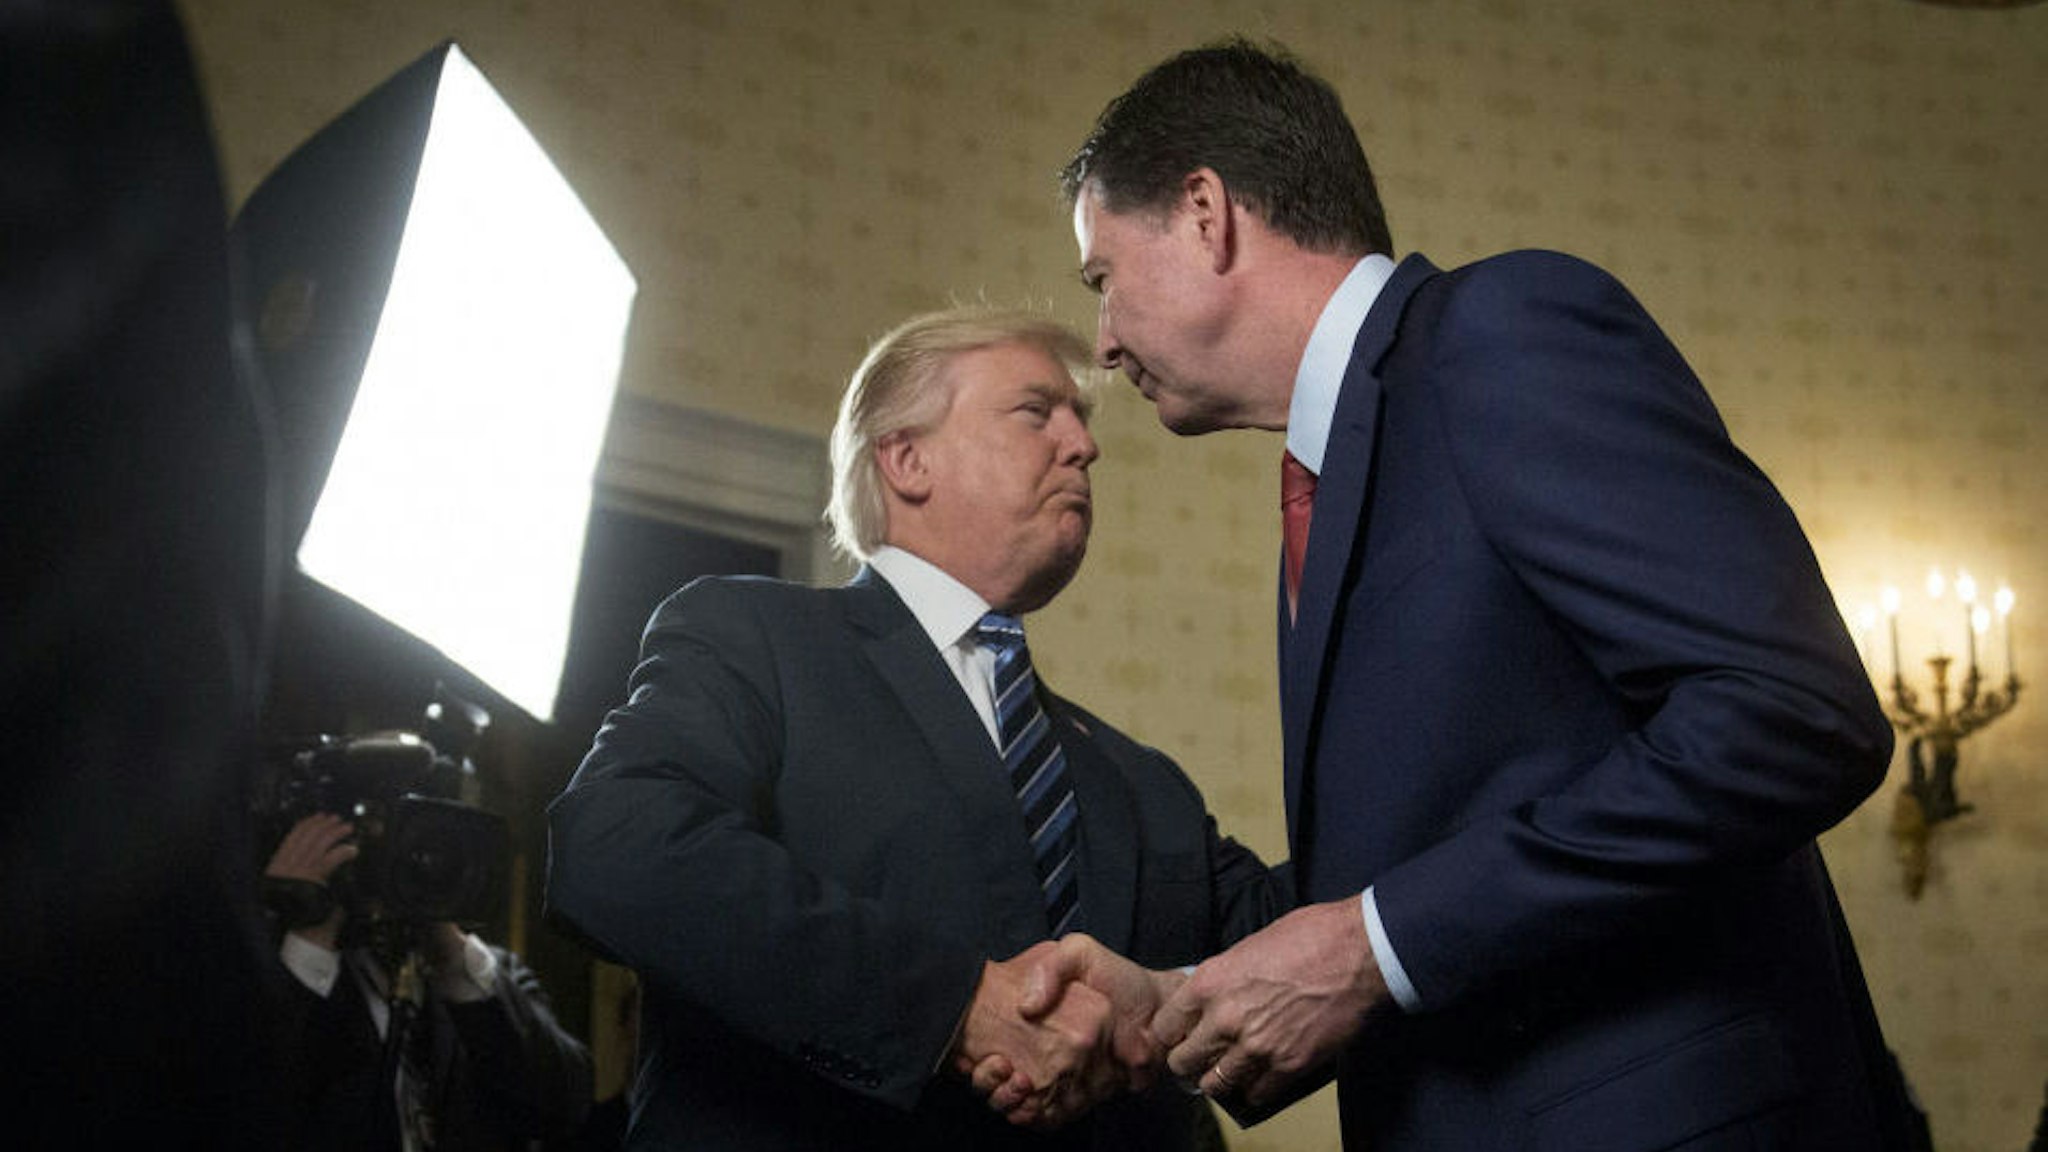 President Donald Trump, left, shakes hands with James Comey, director of the Federal Bureau of Investigation (FBI), during an Inaugural Law Enforcement Officers and First Responders Reception in the Blue Room of the White House in Washington, D.C., U.S., on Sunday, Jan. 22, 2017. The one year anniversary of U.S. President Donald Trump's inauguration falls on Saturday, January 20, 2018. Our editors select the best archive images looking back over Trump’s first year in office. Photographer: Andrew Harrer/Bloomberg